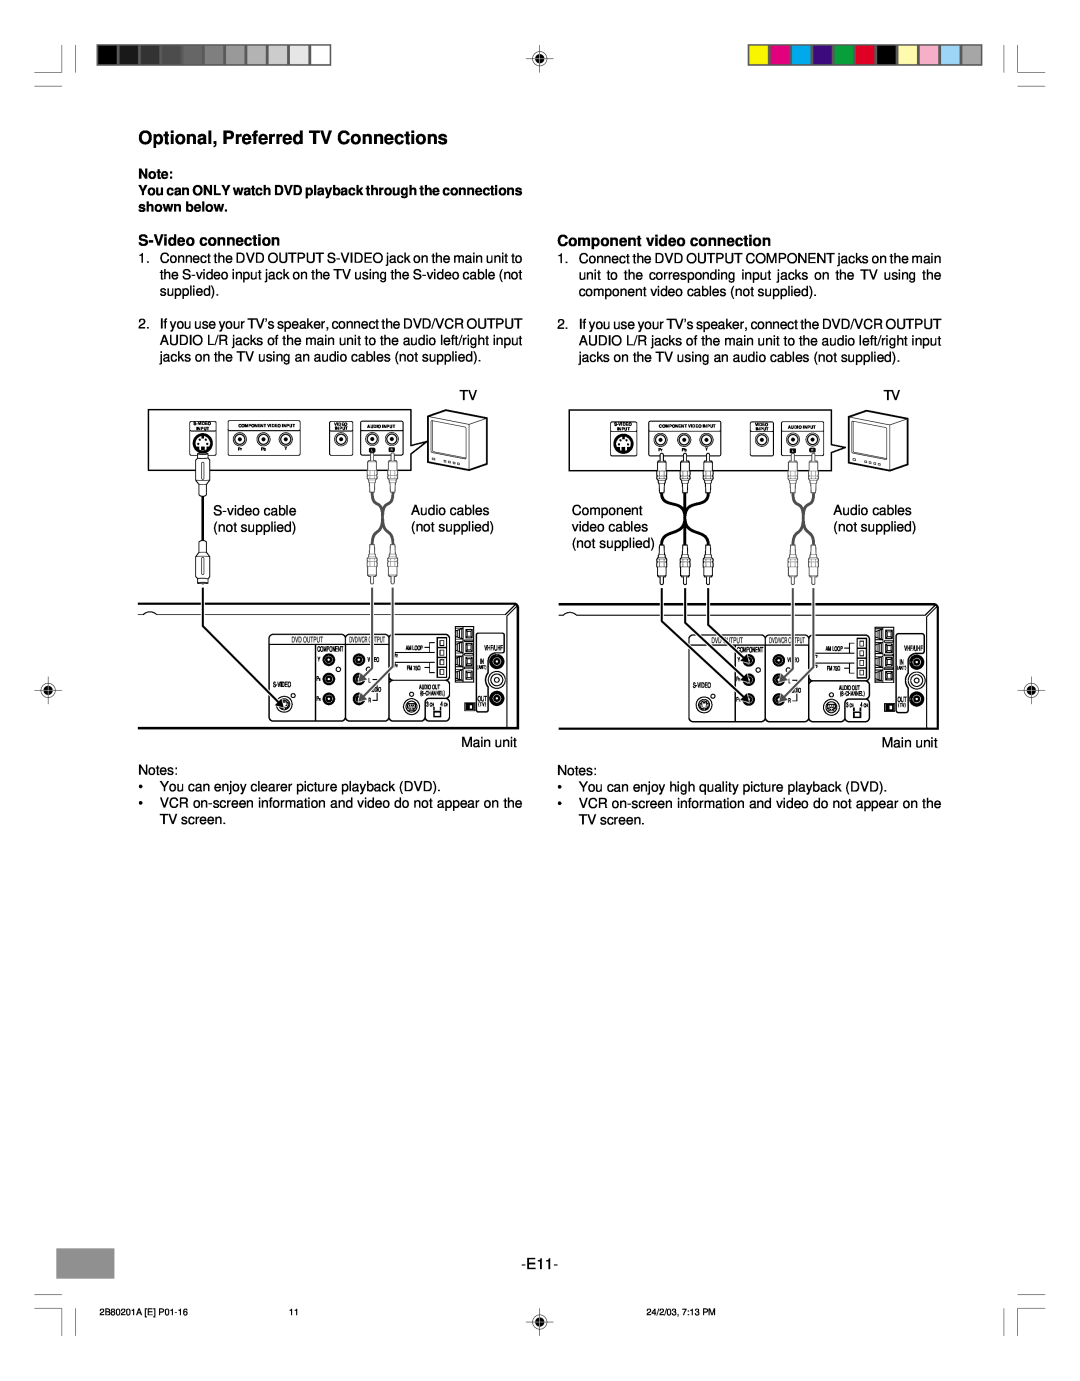 Sanyo DWM-3500 instruction manual Optional, Preferred TV Connections, S-Videoconnection, Component video connection 